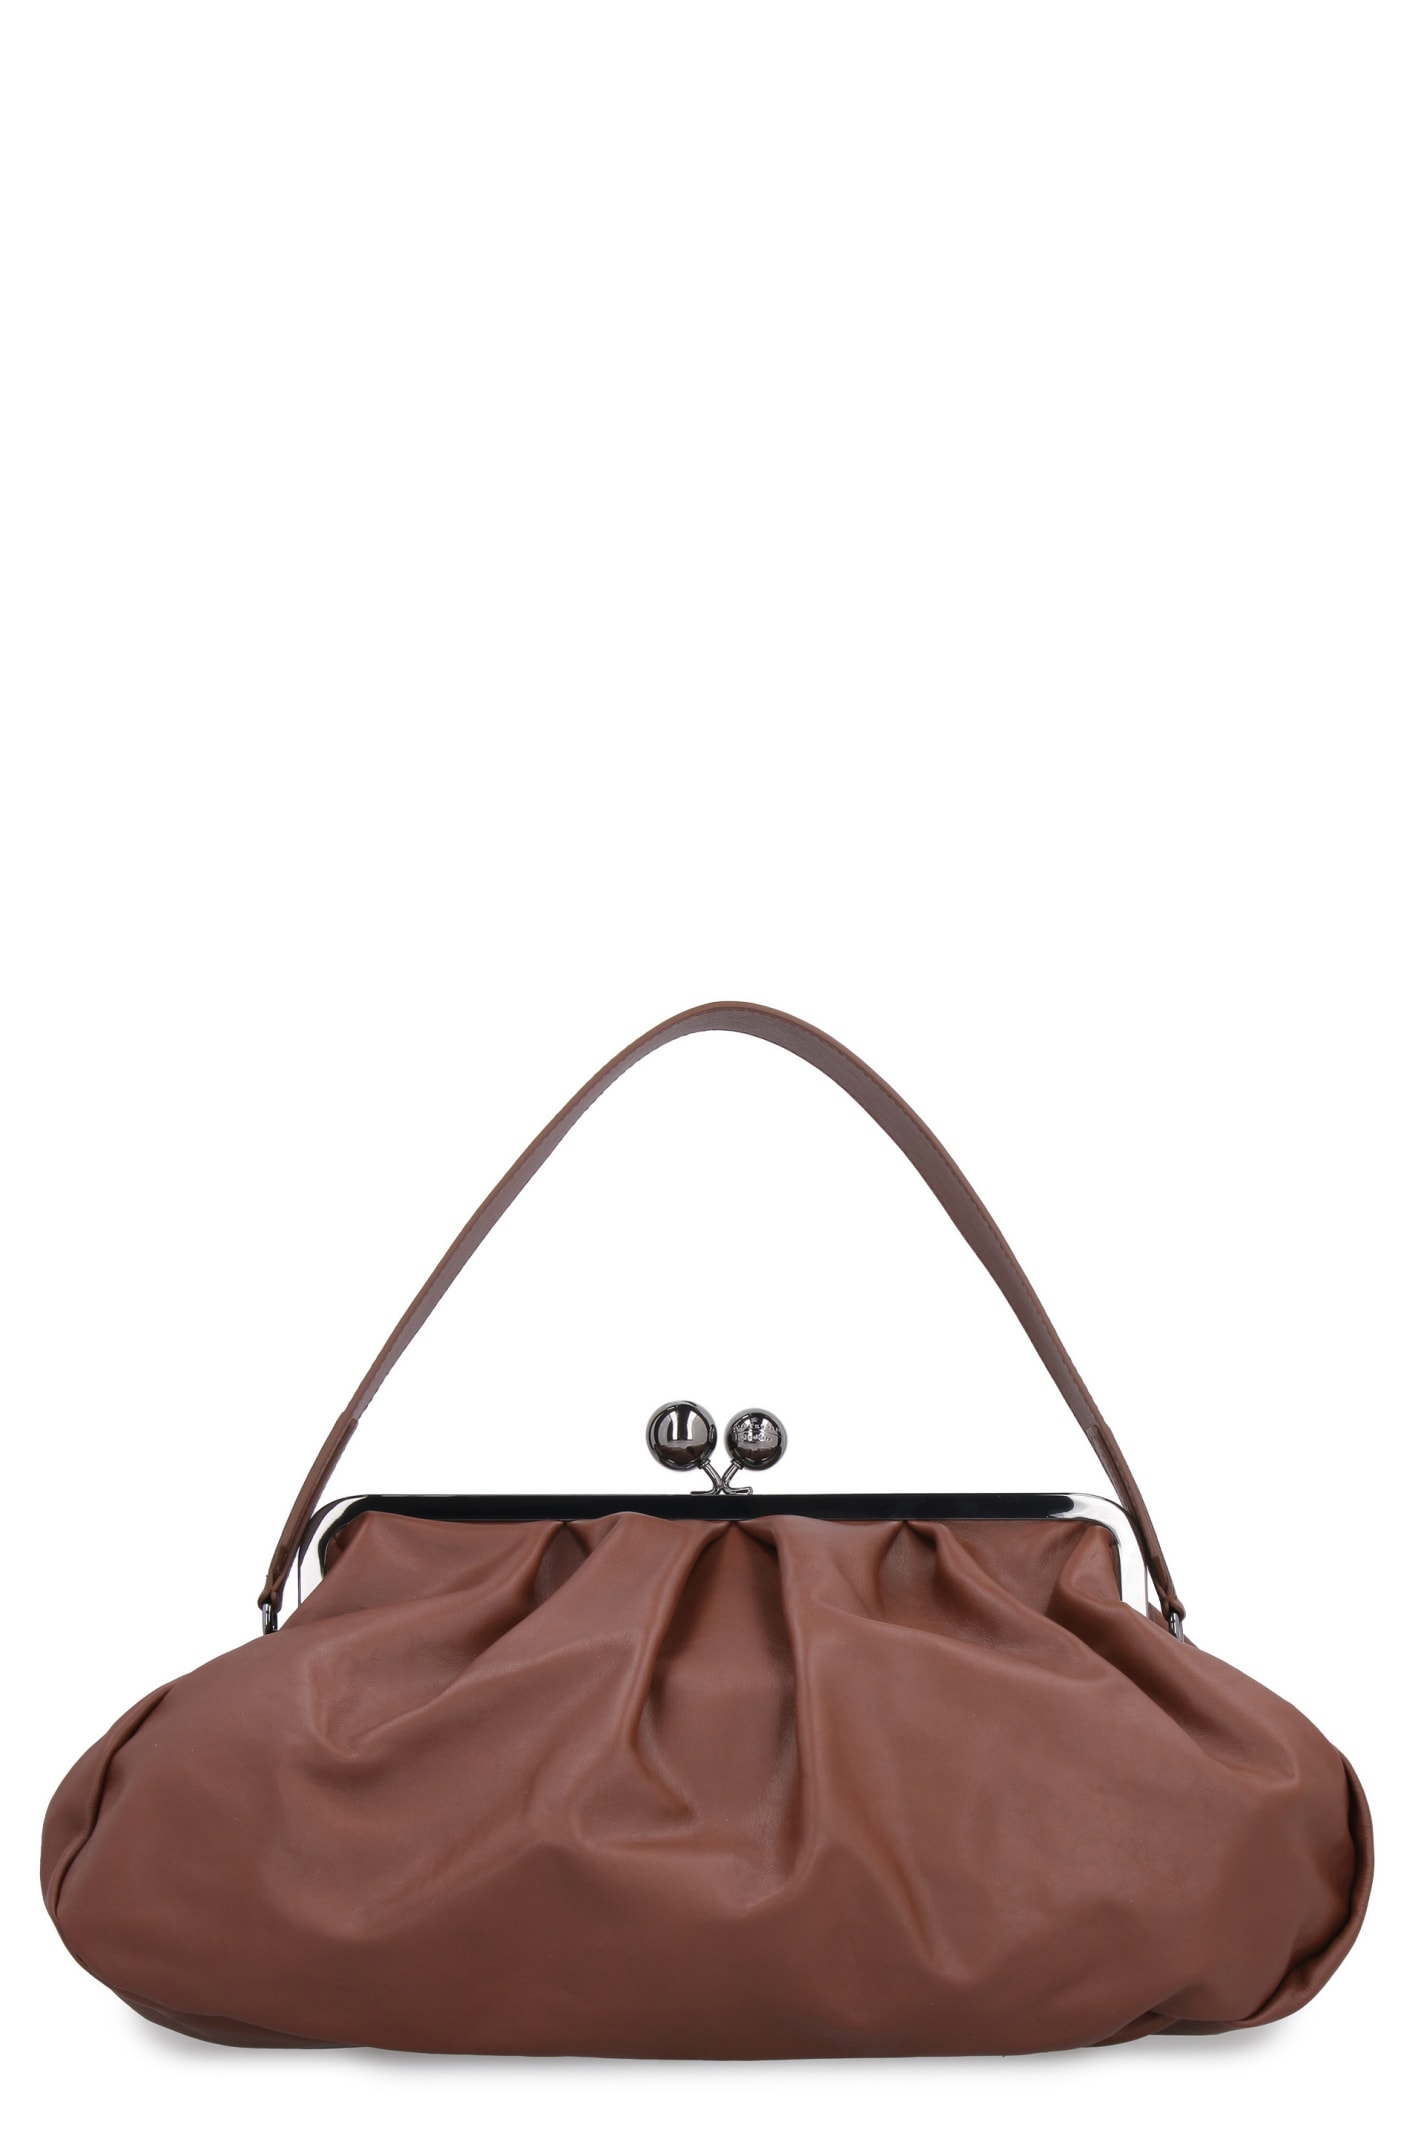 Weekend Max Mara Weekend Max Mara Pasticcino Leather Clutch With Strap ...